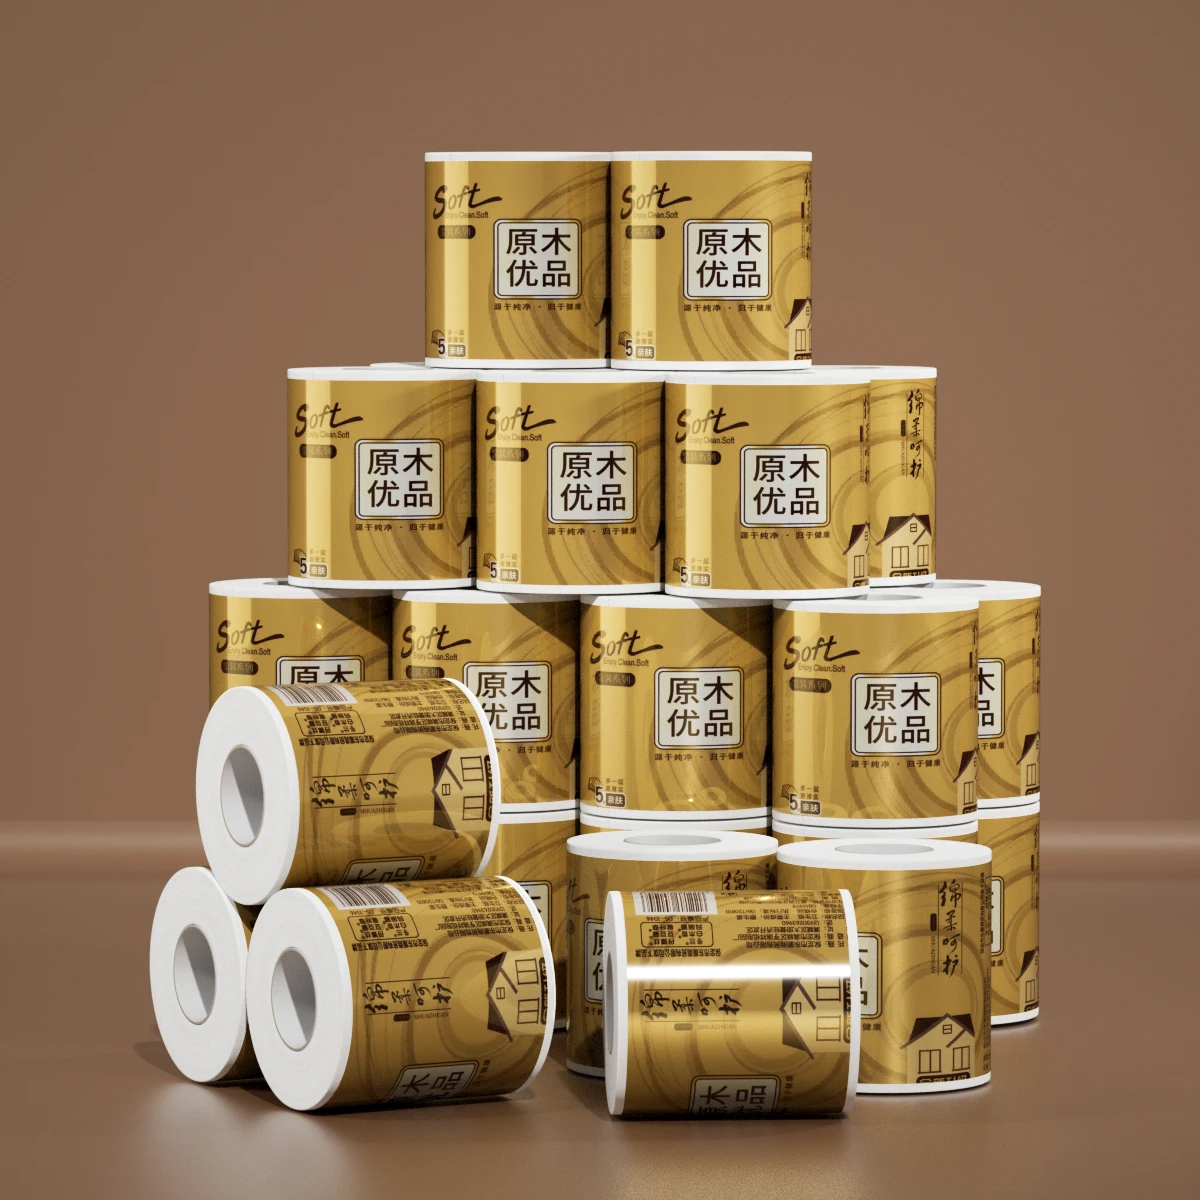 Toliet paper roll  1/2/3/4 ply 100% Virgin Wood Pulp  Factory direct sales Soft Toilet Tissue roll unbleached